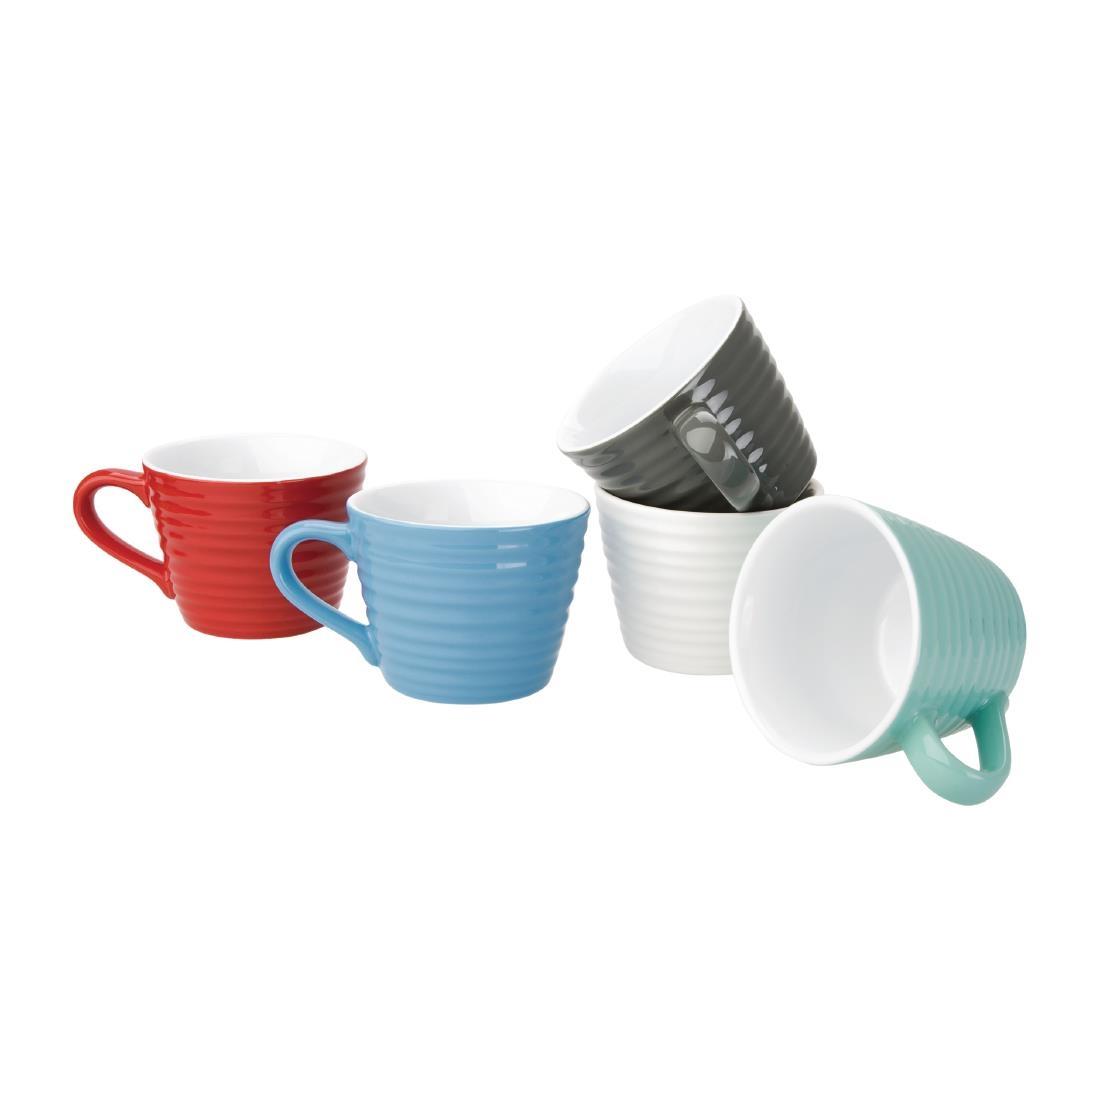 Olympia Café Aroma Mugs Red 230ml (Pack of 6) - DH637  - 2